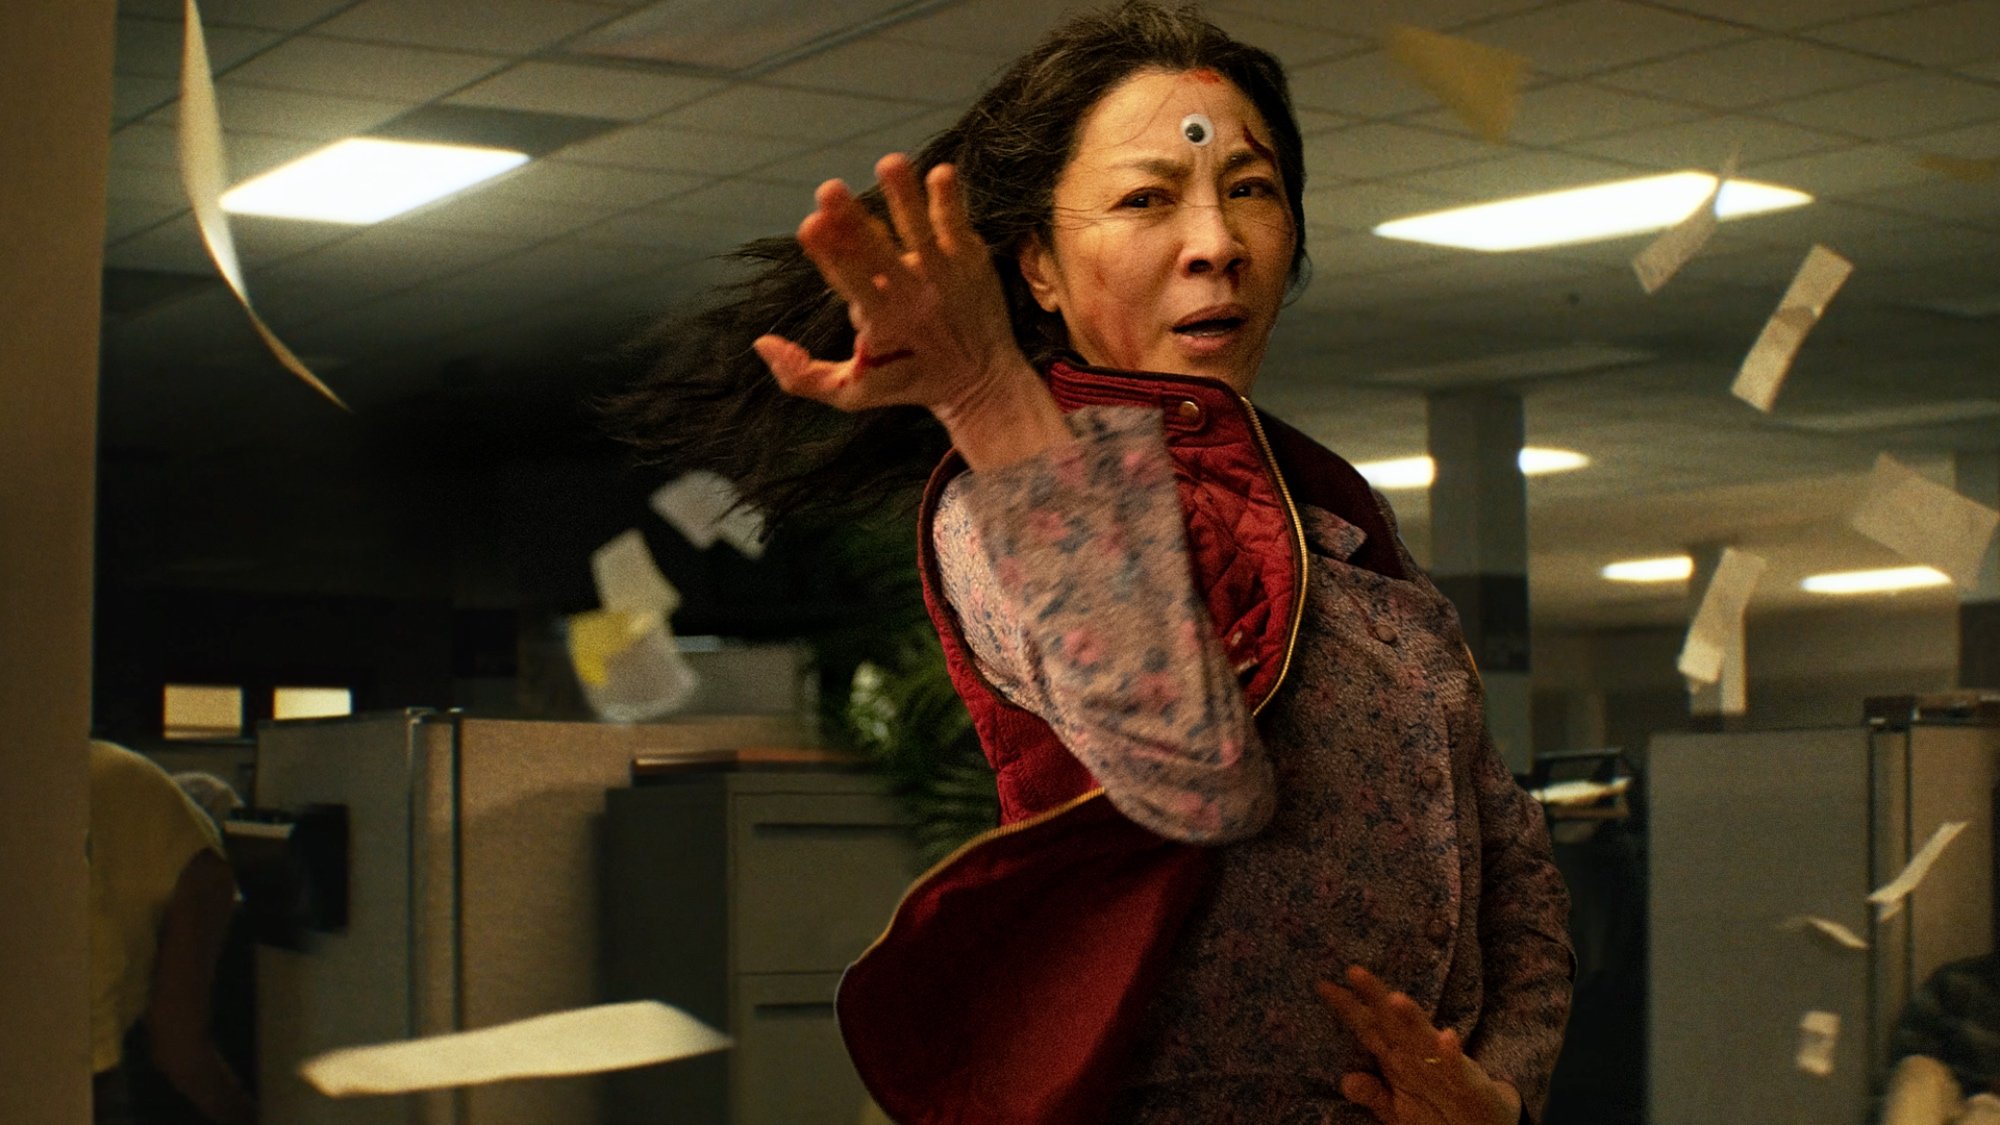 'Everything Everywhere All at Once' Michelle Yeoh as Evelyn Wang in a fighting pose with a googly eye on her forehead